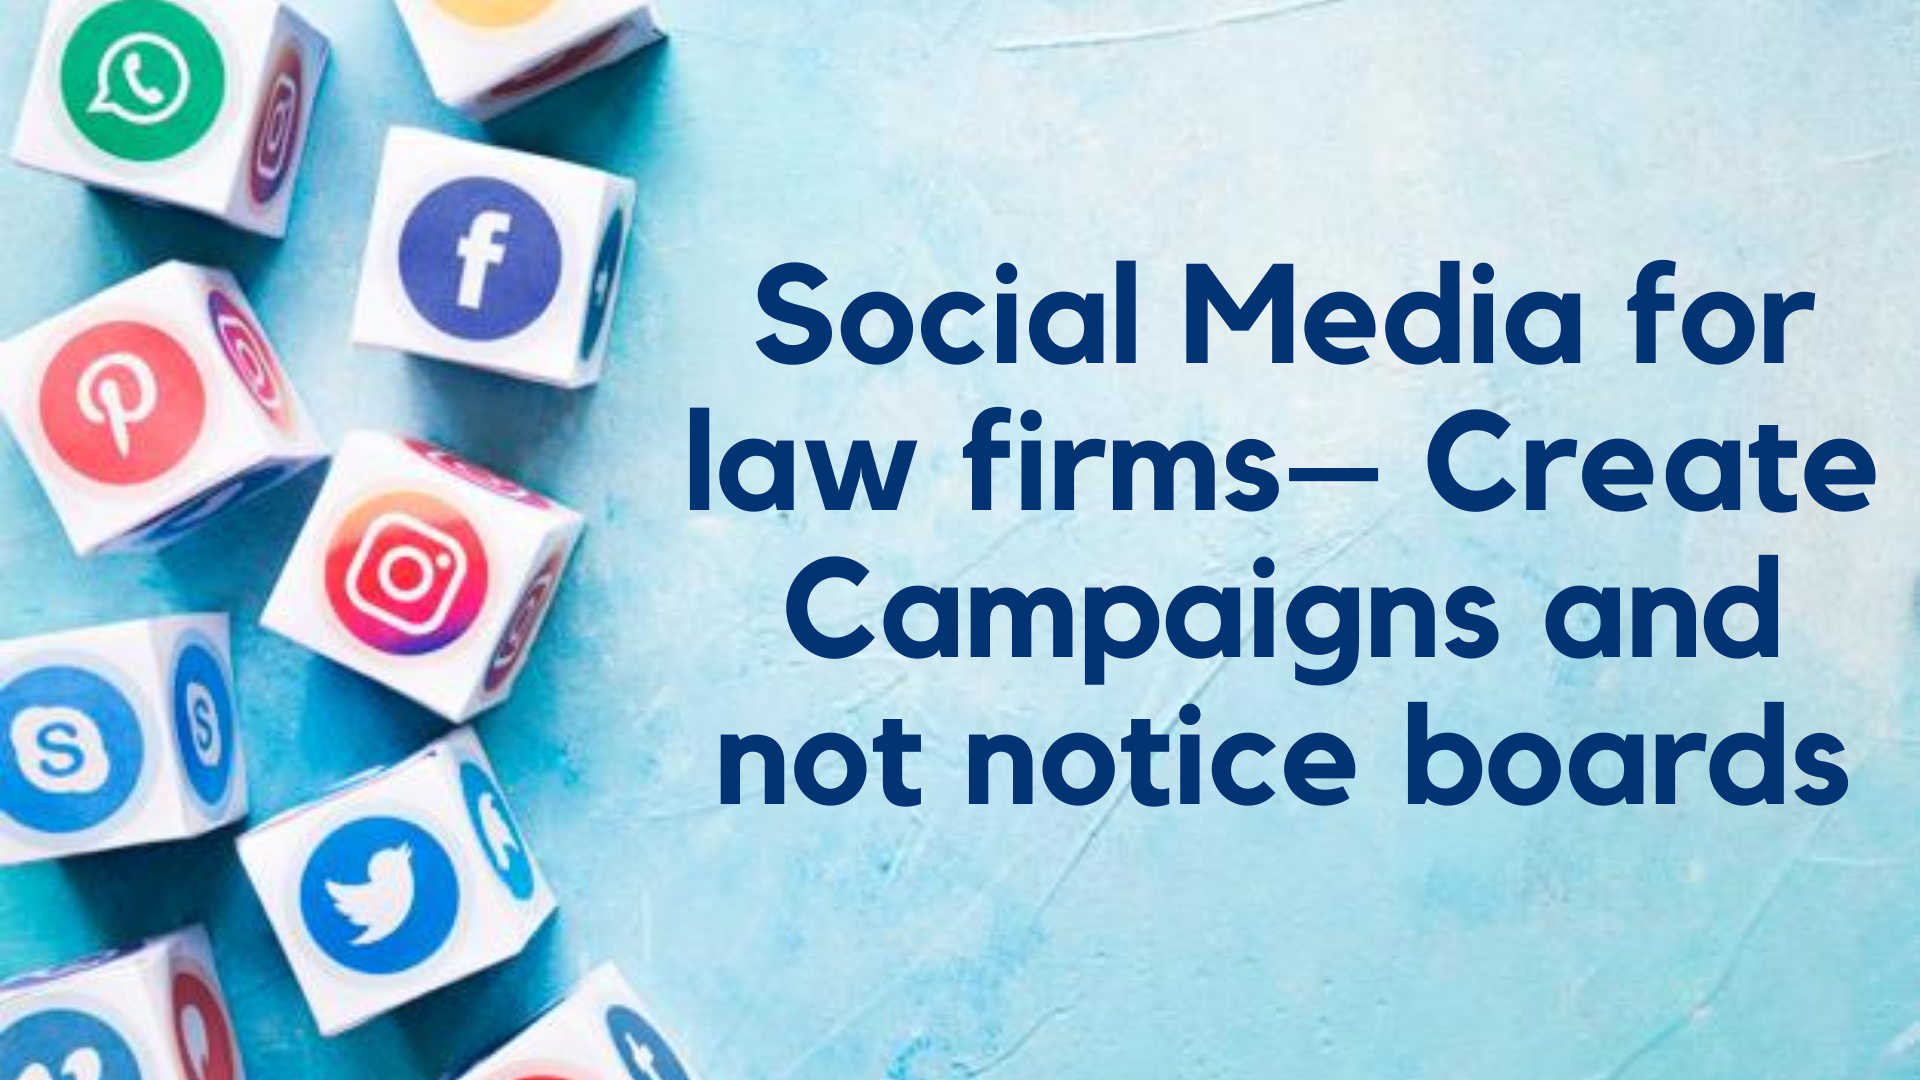 Social Media for law firms– Create Campaigns and not notice boards